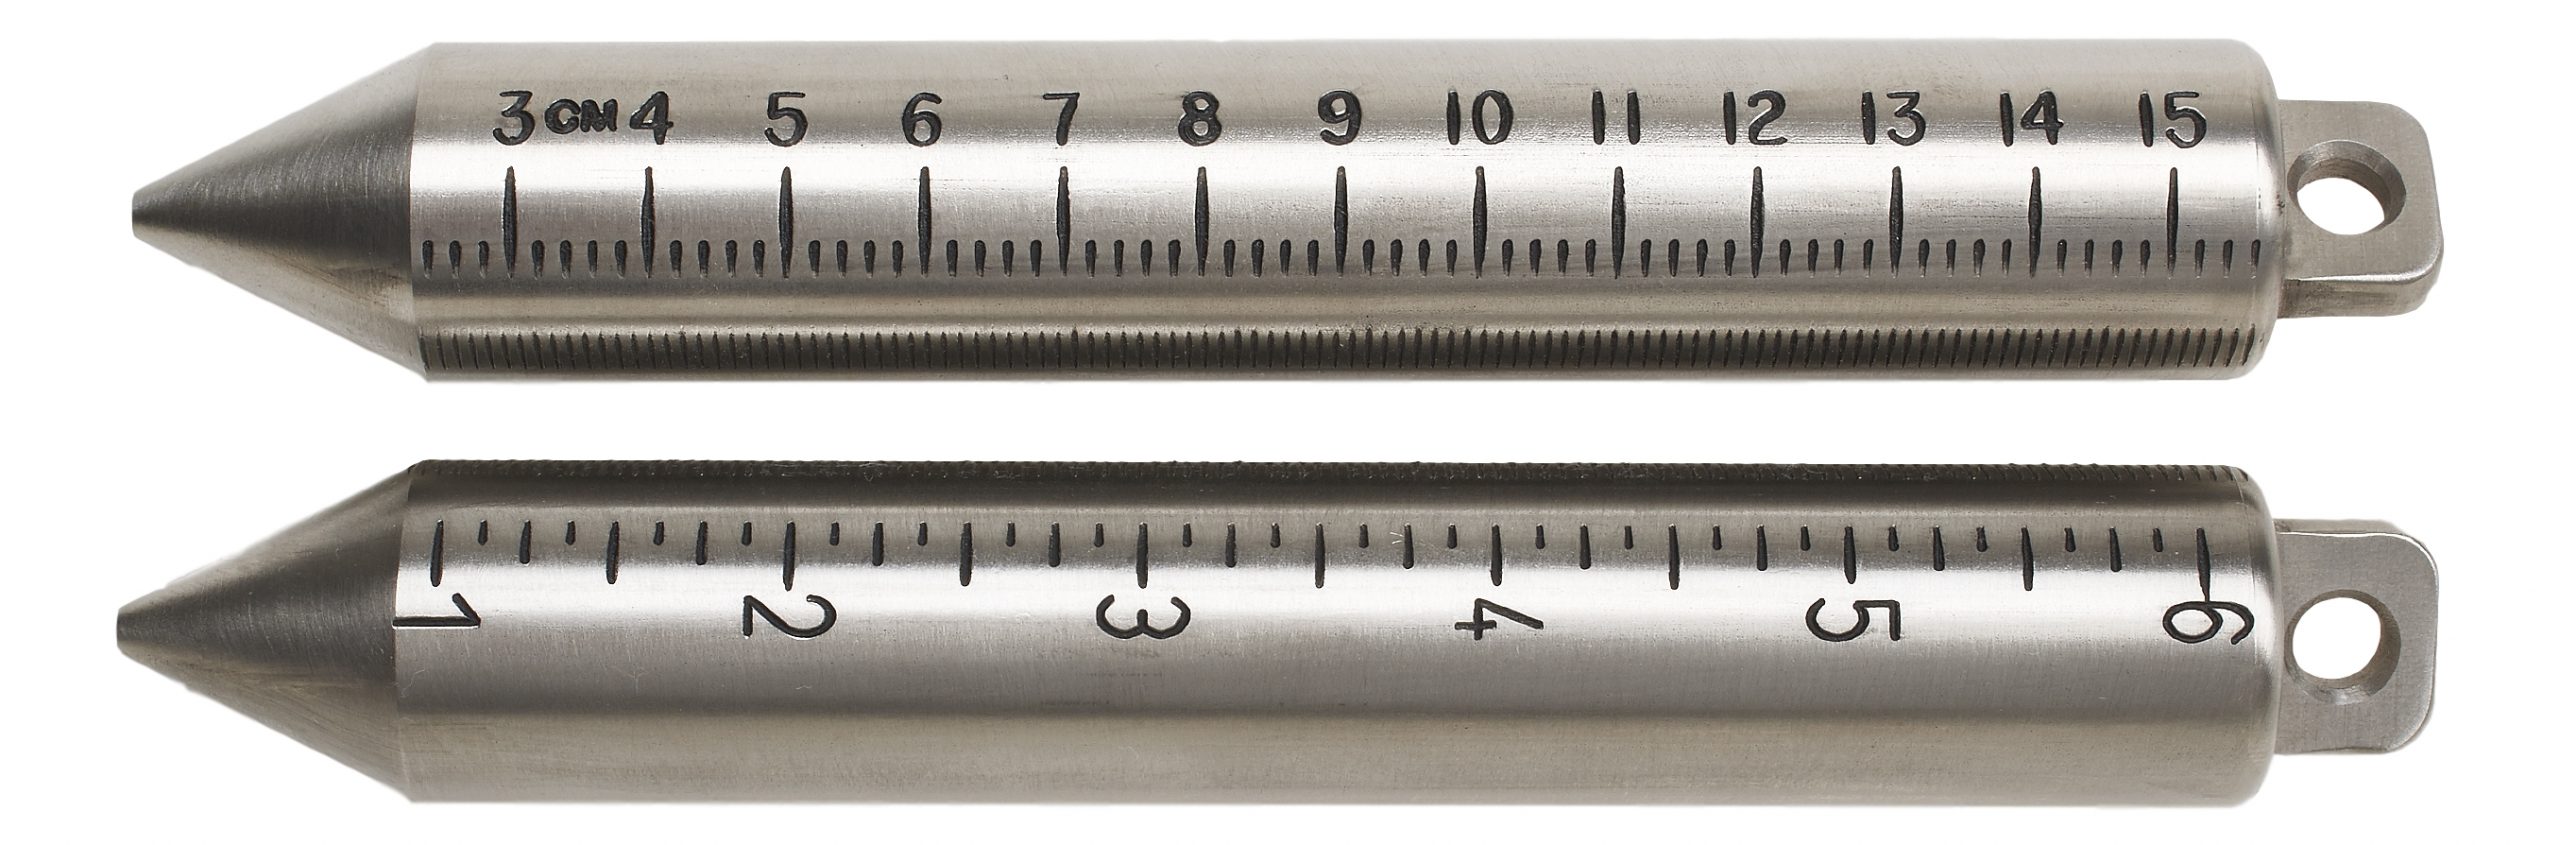 590GMES - Stainless Metric